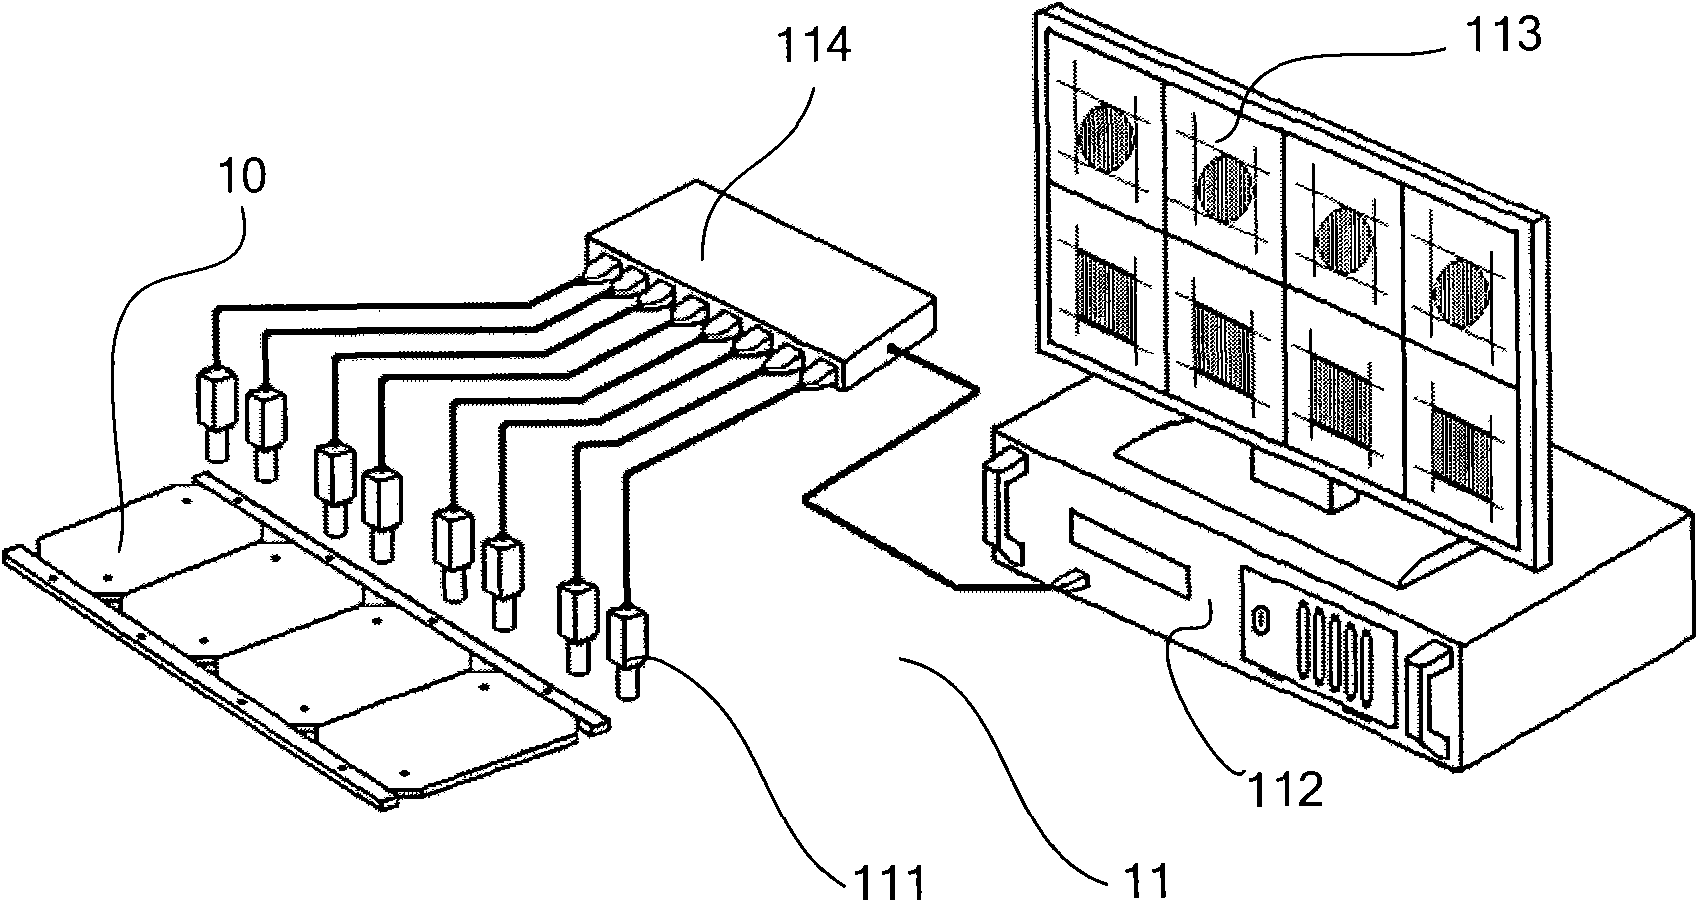 Circuit board framing device and drilling and milling device with image framing